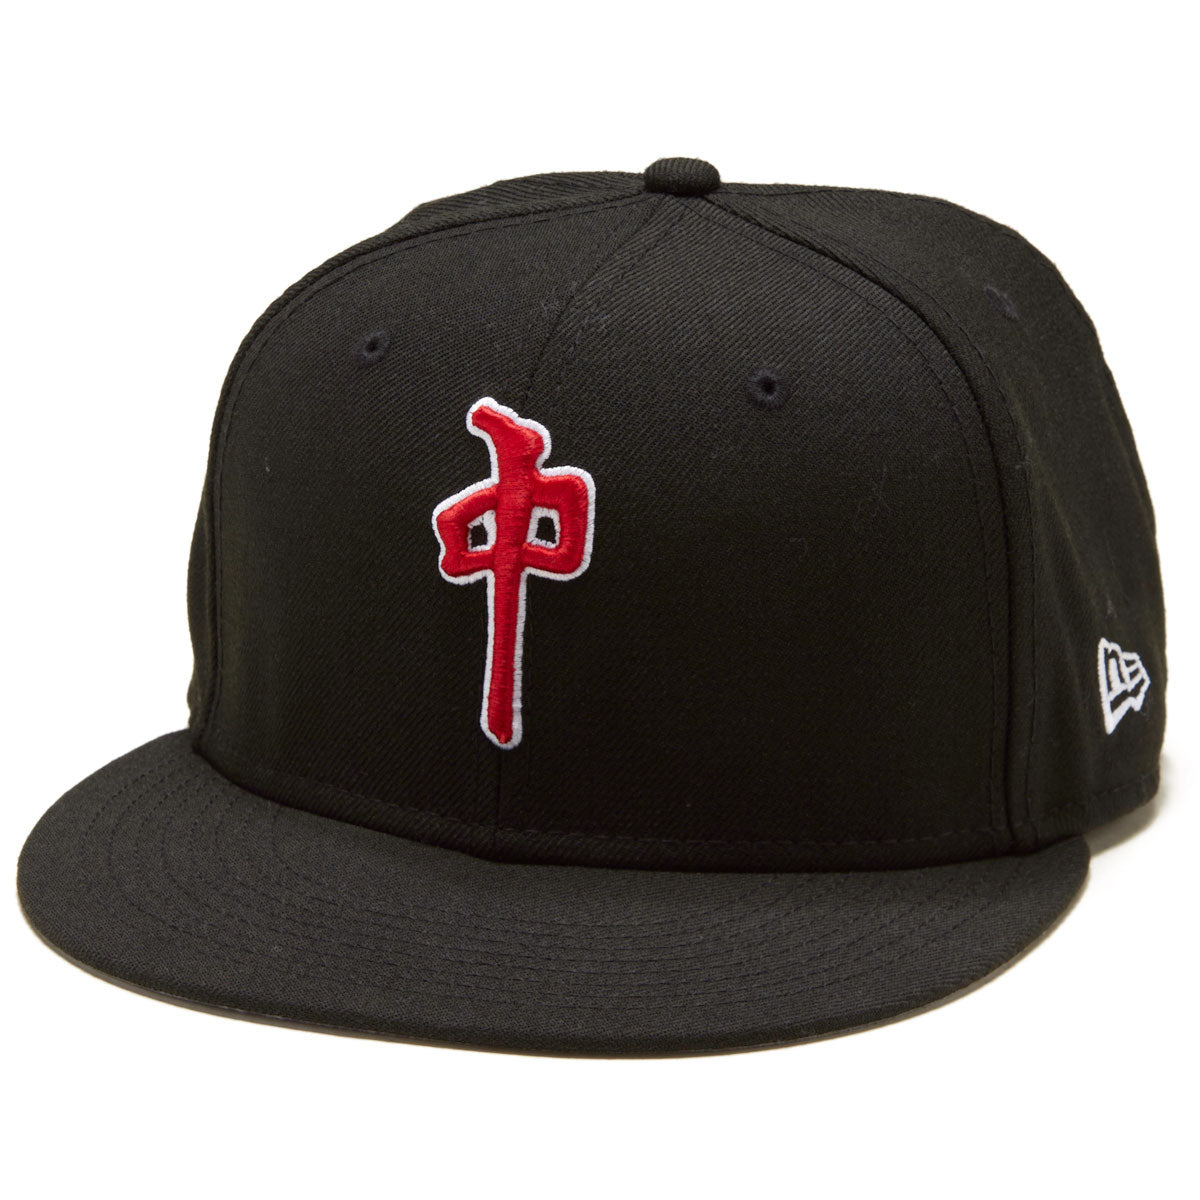 RDS New Era Dynasty Hat - Black/Red image 1